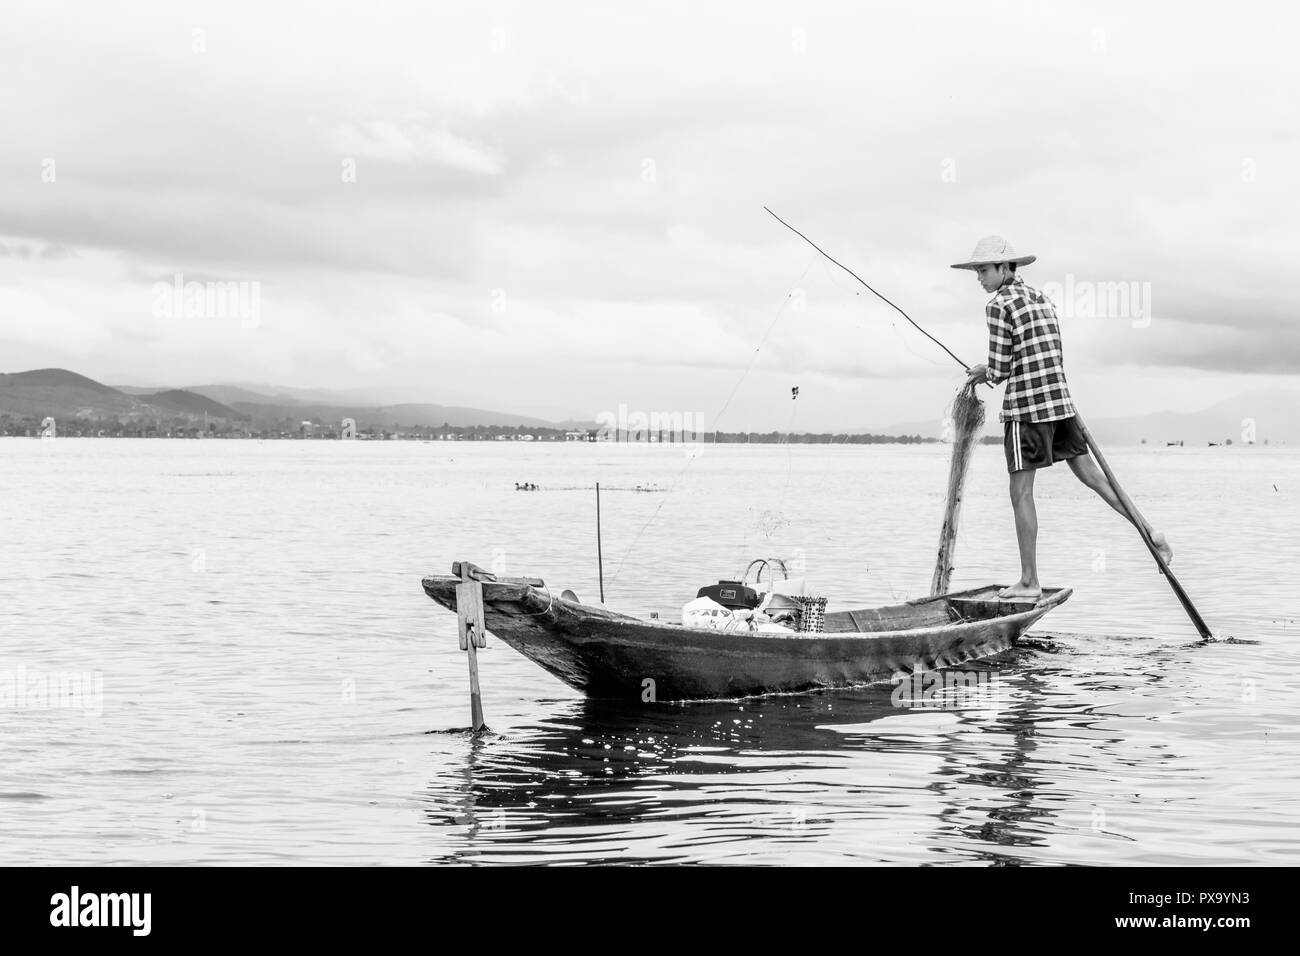 Travel local young Burmese male fisherman wearing checked shirt, using stick and net to fish, balancing on one foot on boat, Inle Lake Myanmar, Burma Stock Photo